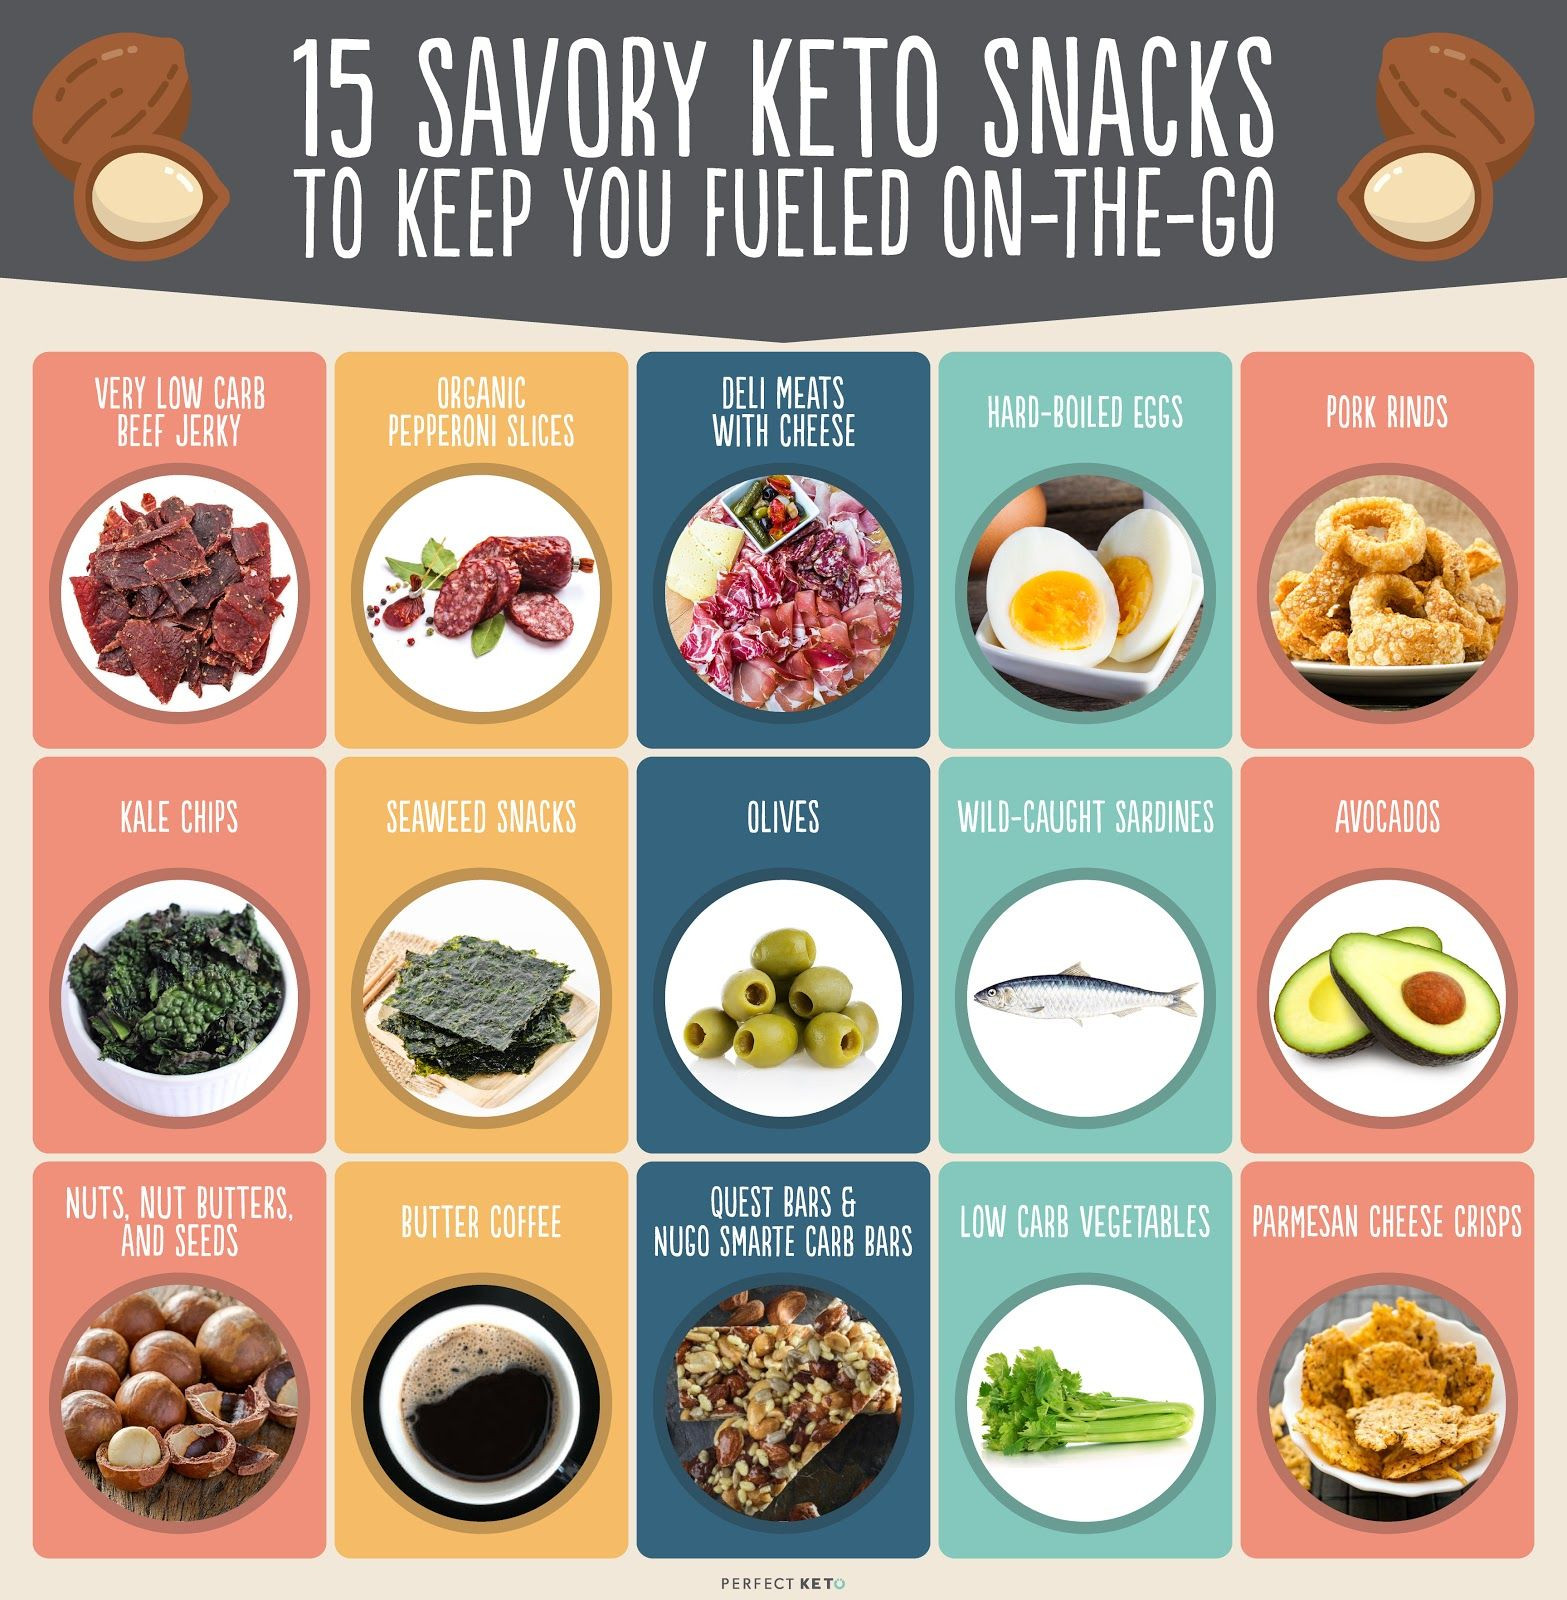 Clean Keto Snacks On The Go
 Ready For You Keto Snacks To Buy 20 Easy Ways to Stay on